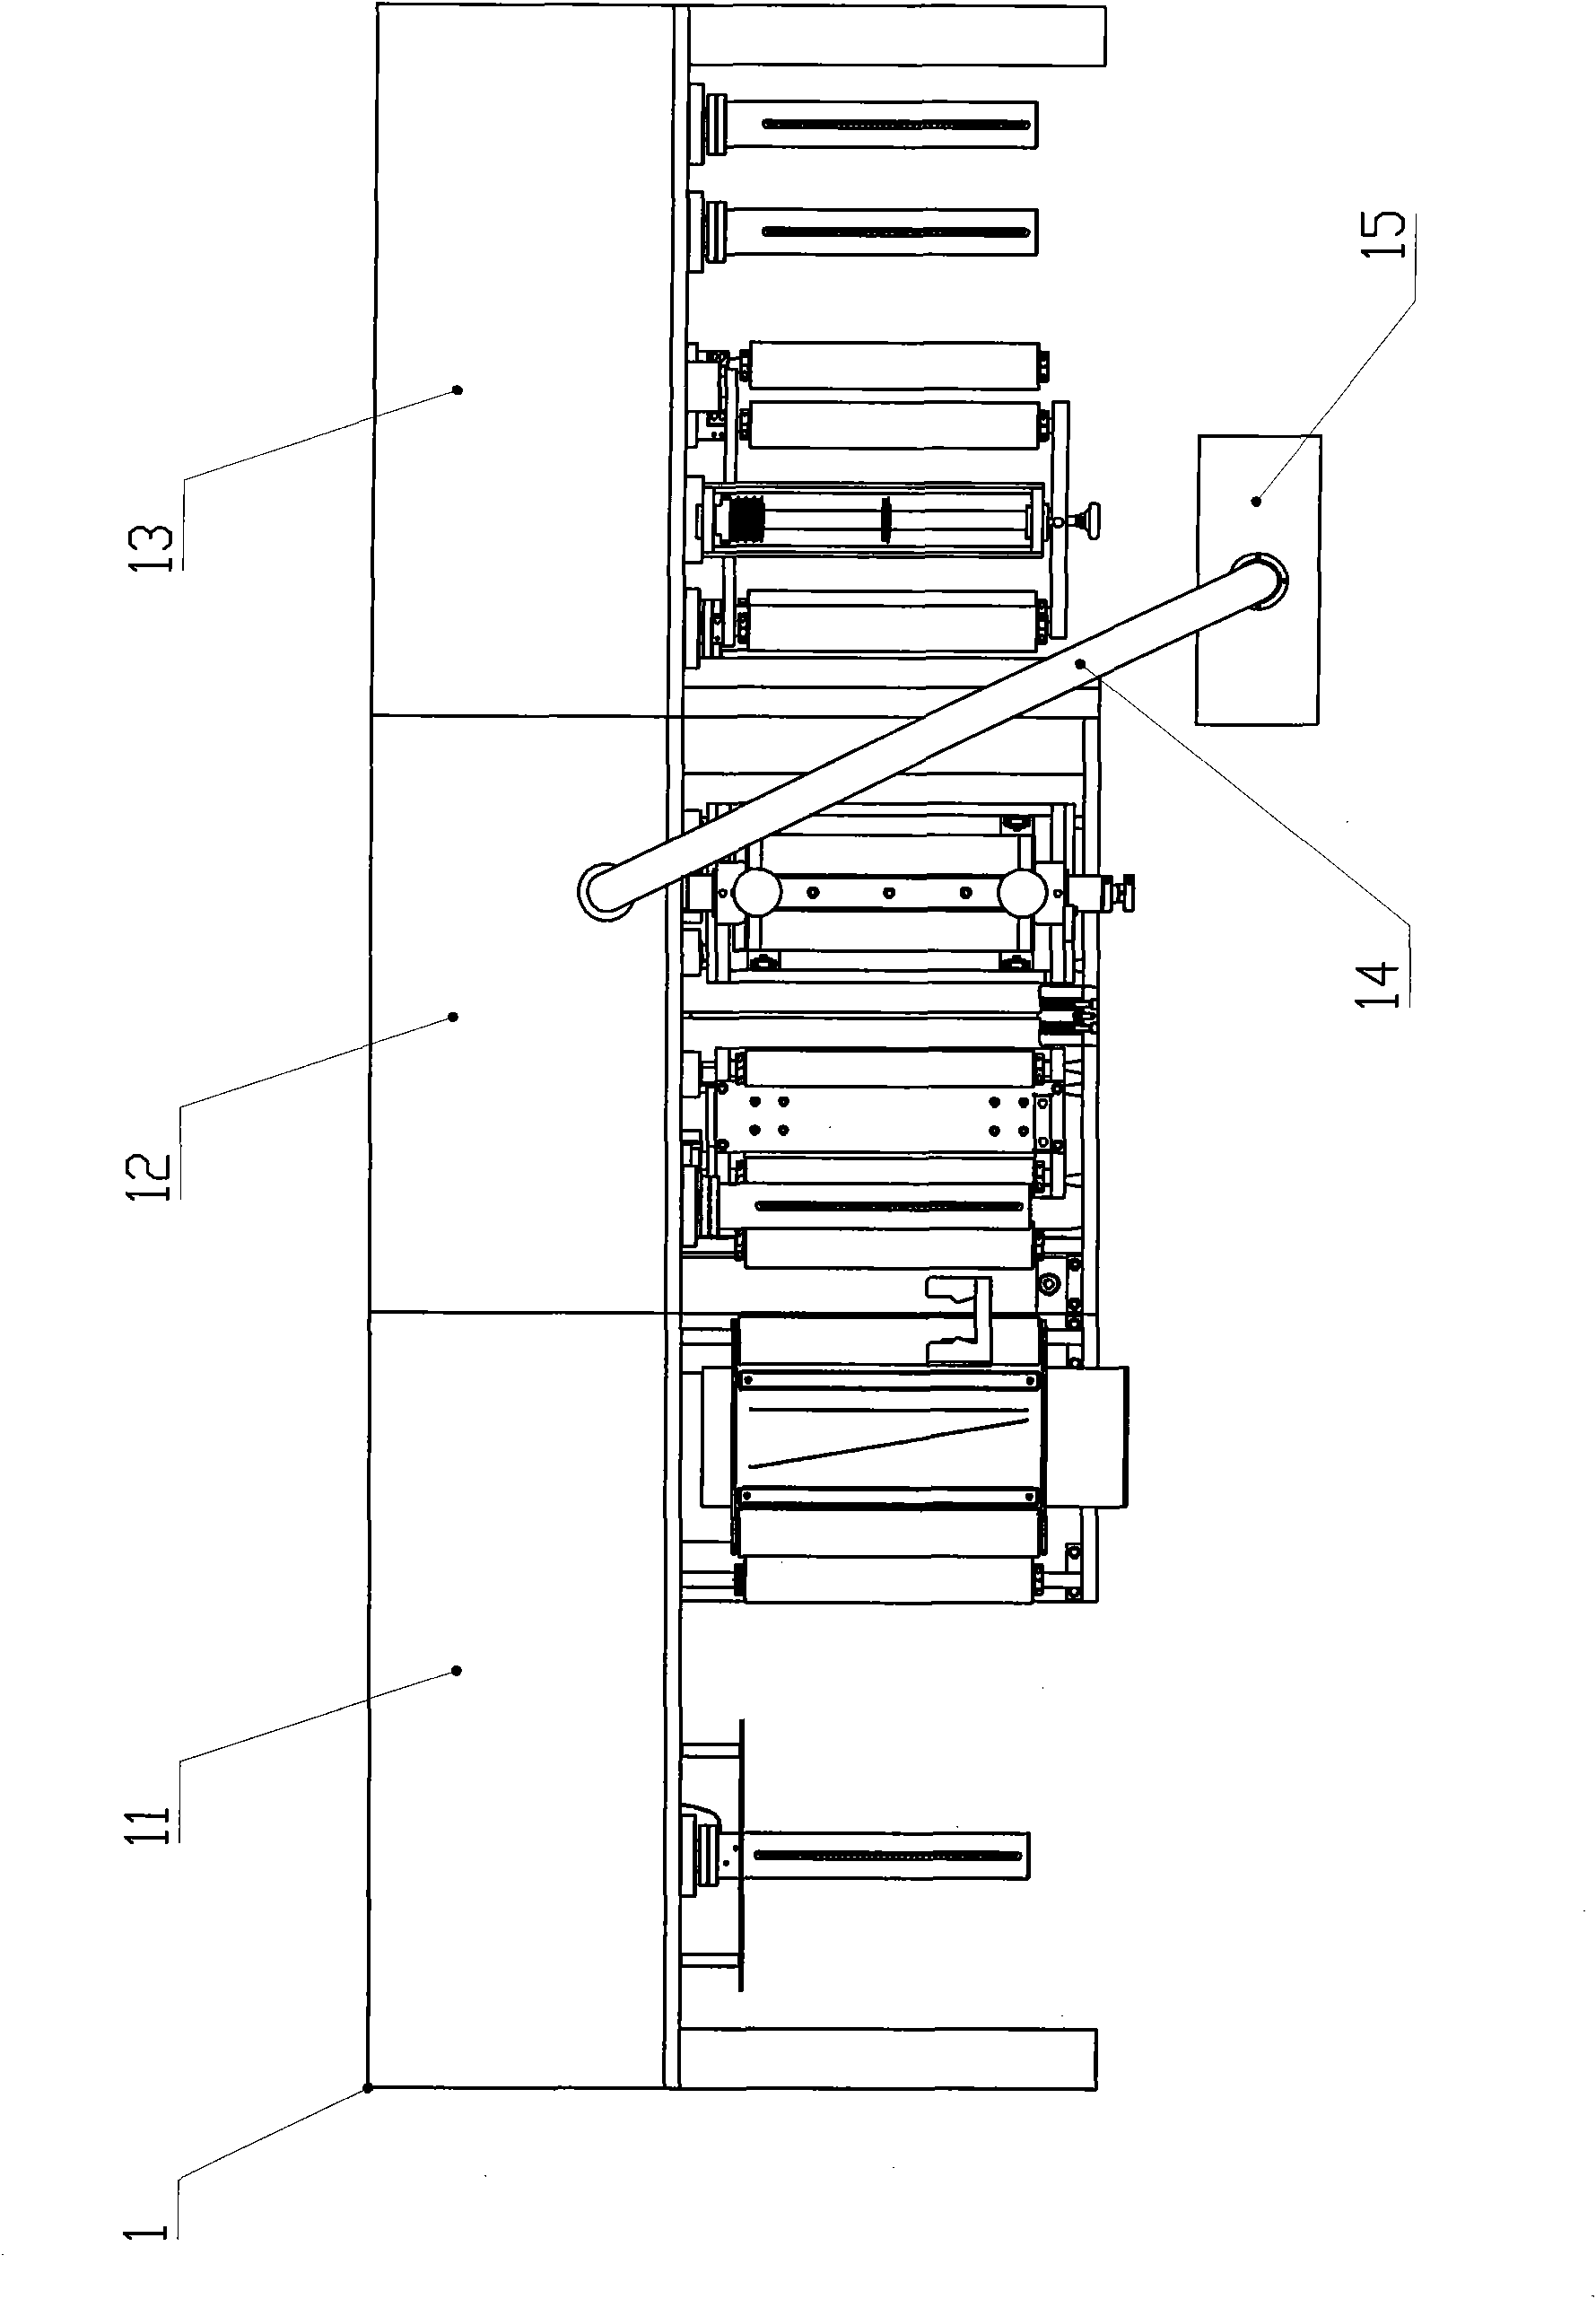 Interchangeable post-press processing system